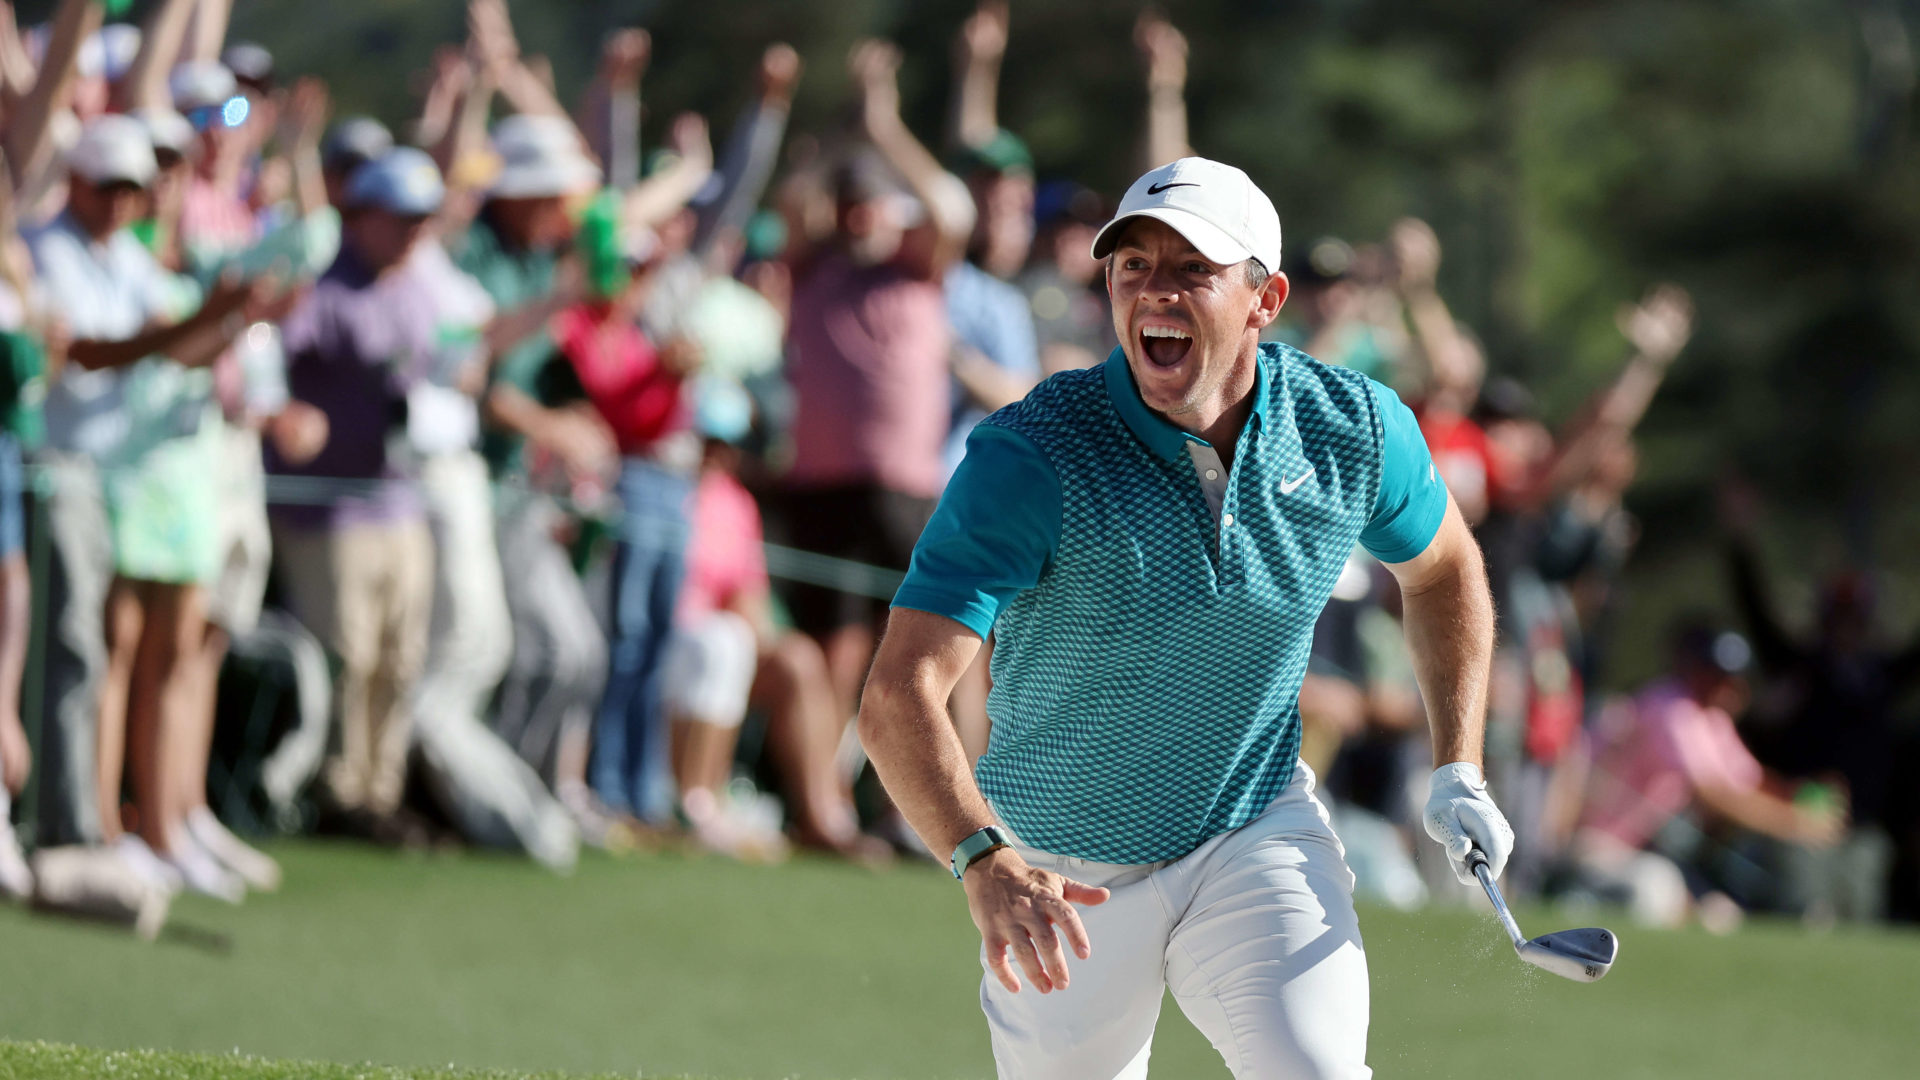 AUGUSTA, GEORGIA - APRIL 10: Rory McIlroy of Northern Ireland reacts after chipping in for birdie from the bunker on the 18th green during the final round of the Masters at Augusta National Golf Club on April 10, 2022 in Augusta, Georgia. (Photo by Gregory Shamus/Getty Images)